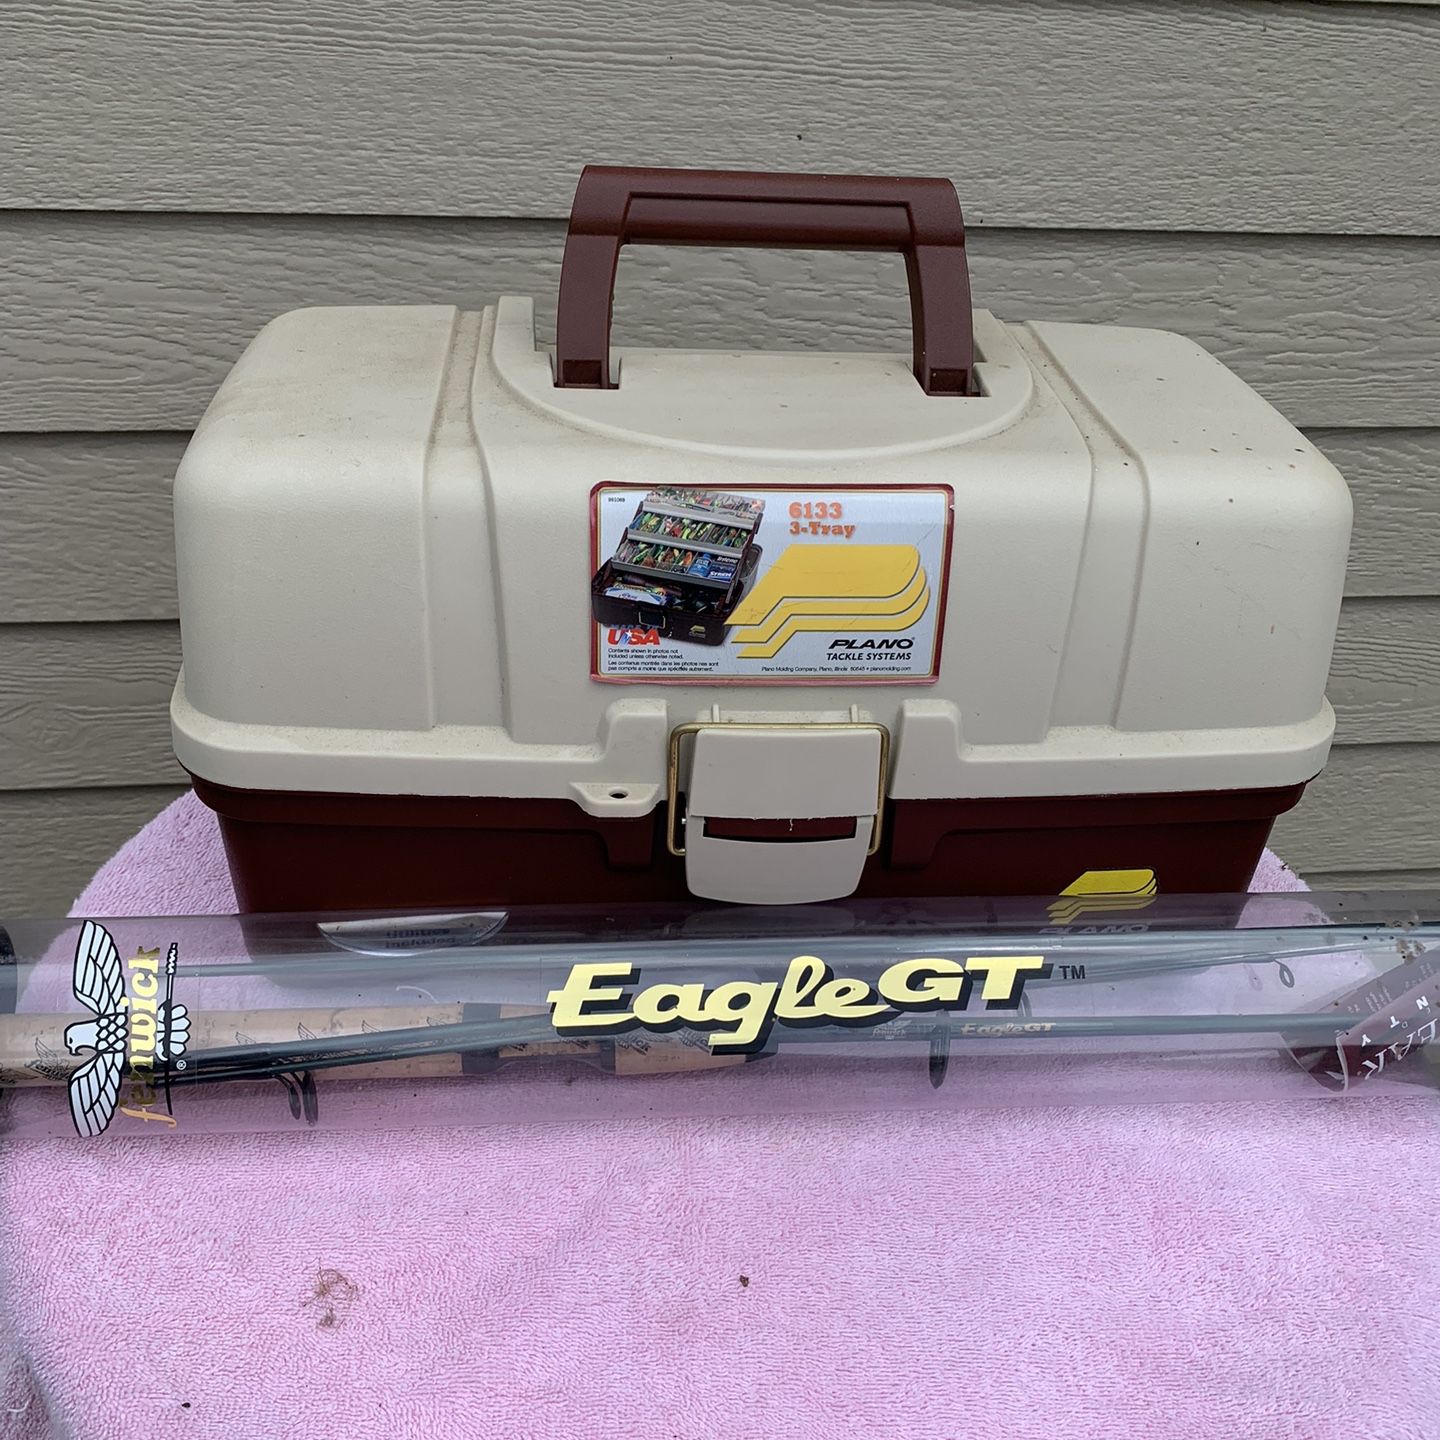 Spongebob Fishing Pole and tackle box for Sale in Lynnwood, WA - OfferUp